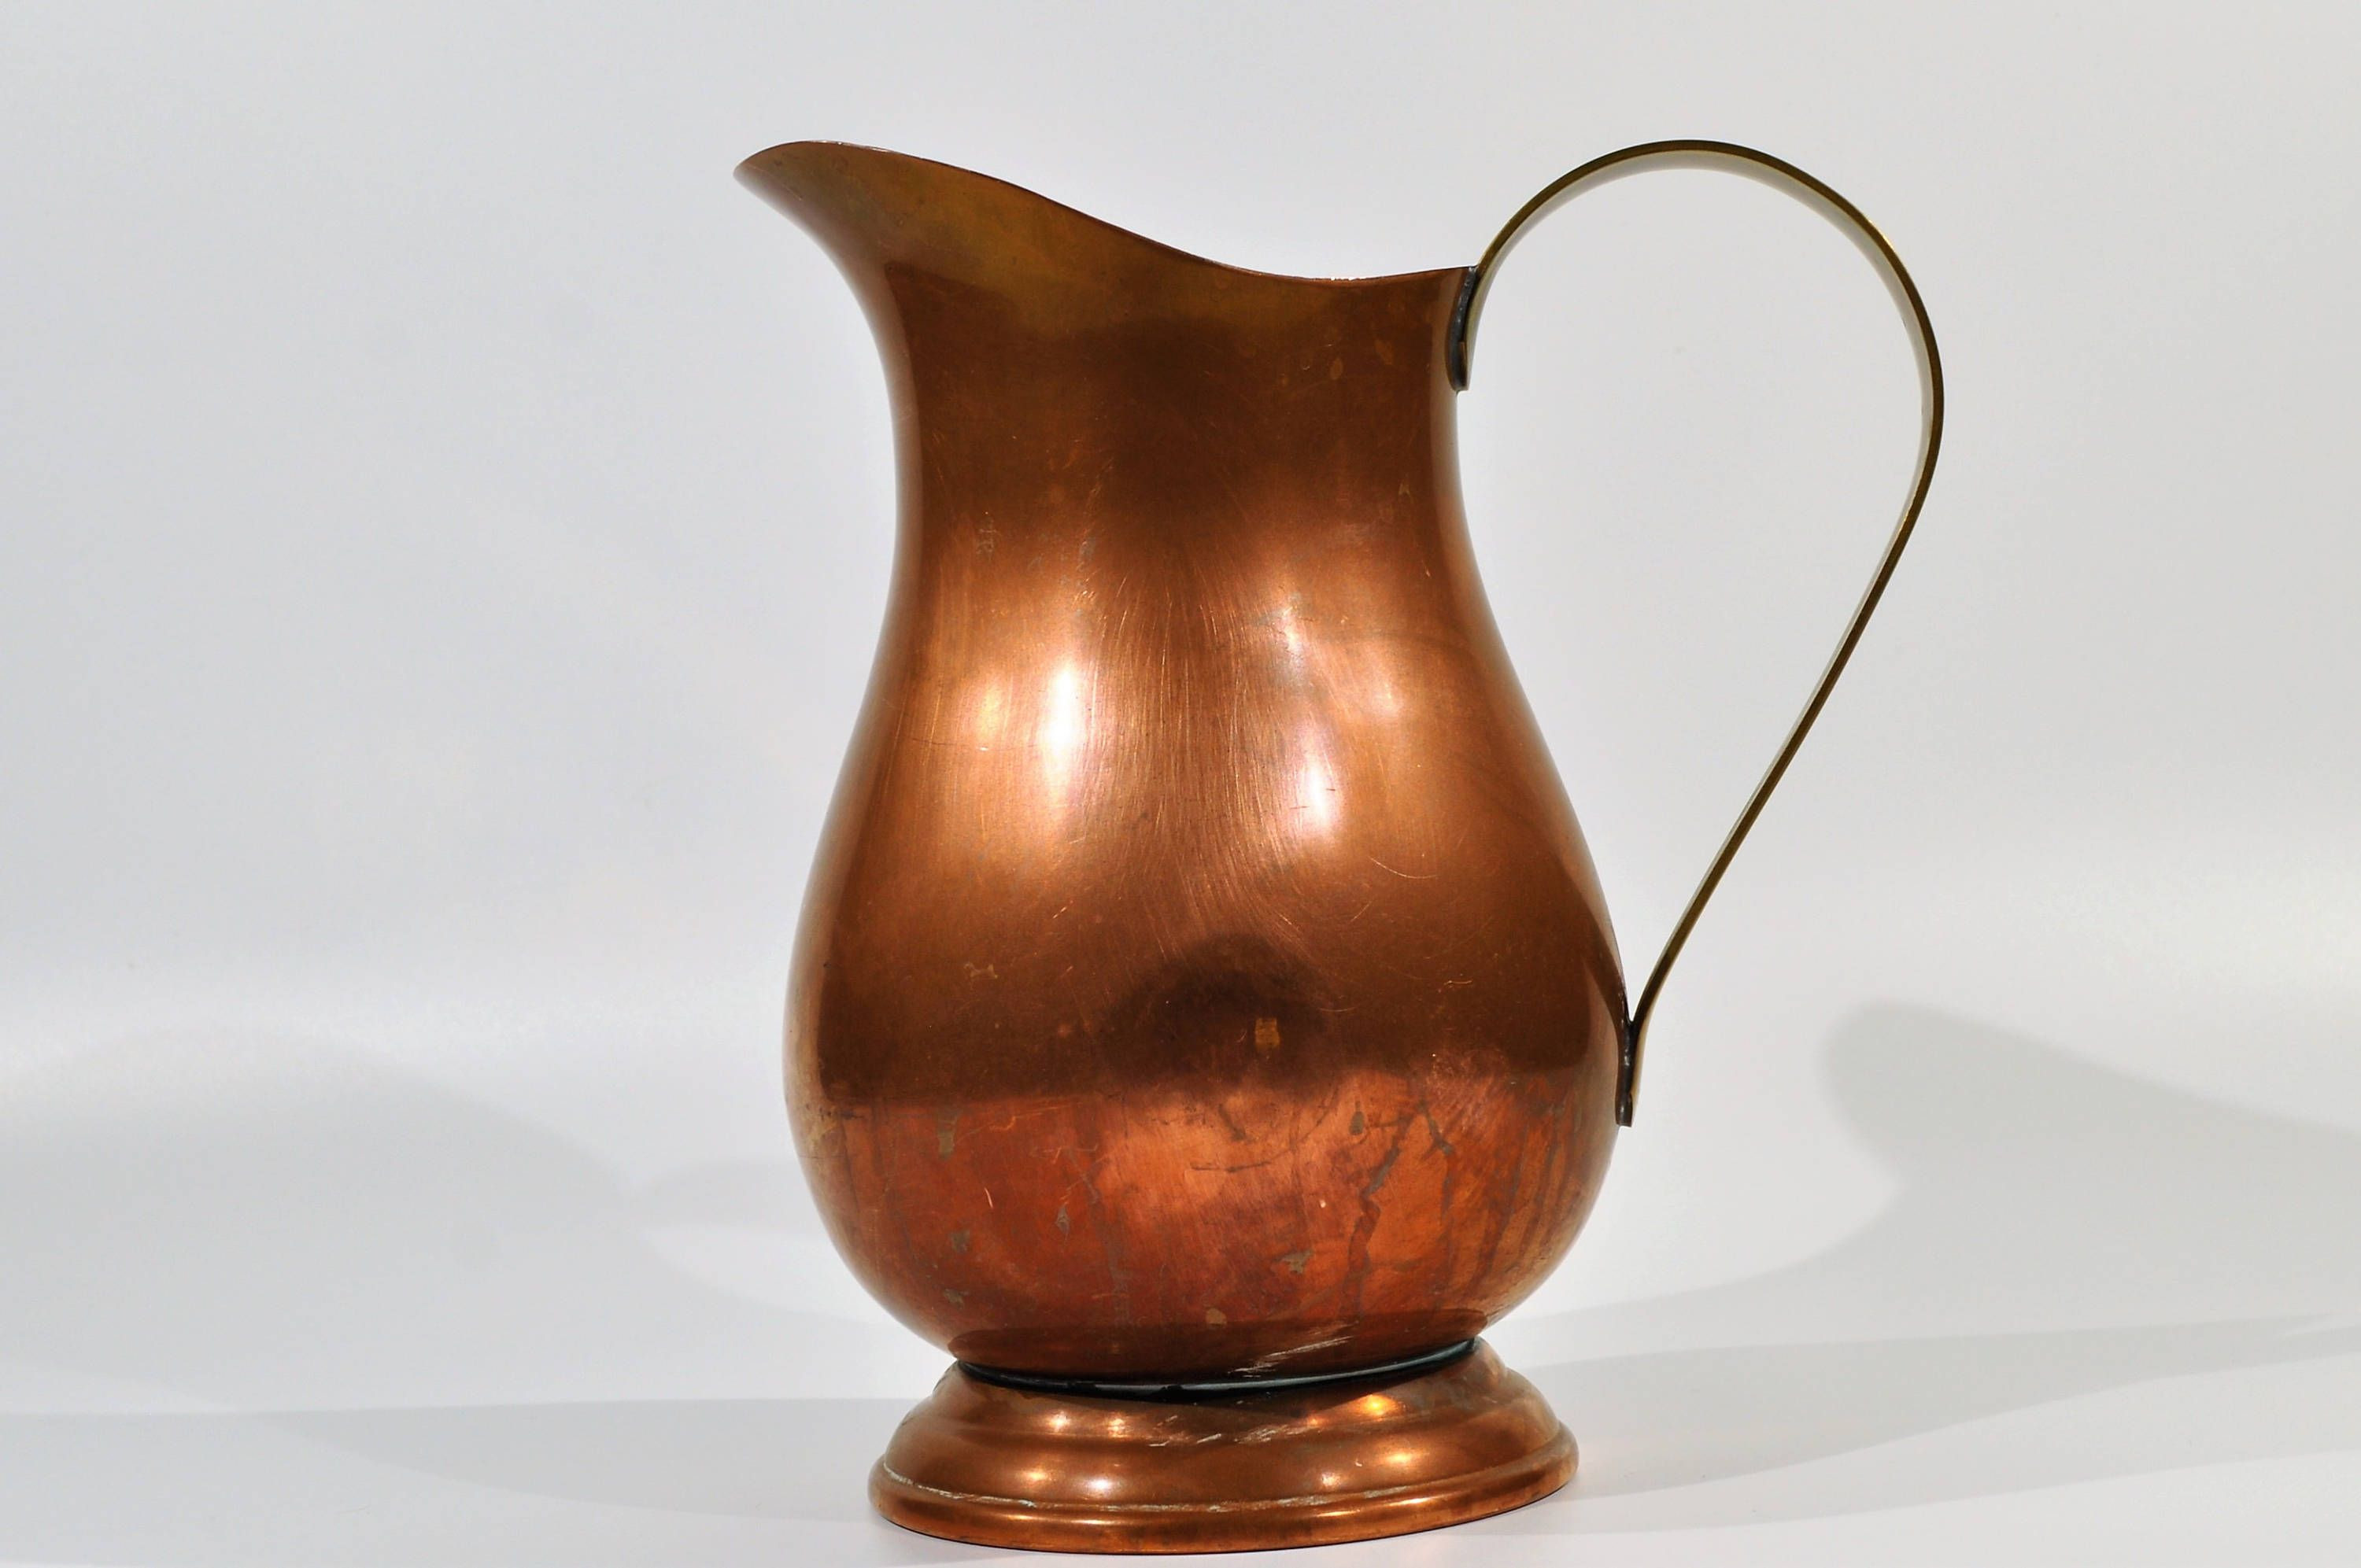 14 Ideal Antique Hammered Copper Vase 2024 free download antique hammered copper vase of image result for copper jug with flowers wedding navy blue and in copper pitcher copper jug vintage wedding flower vase jug country house pitcher farmhouse de